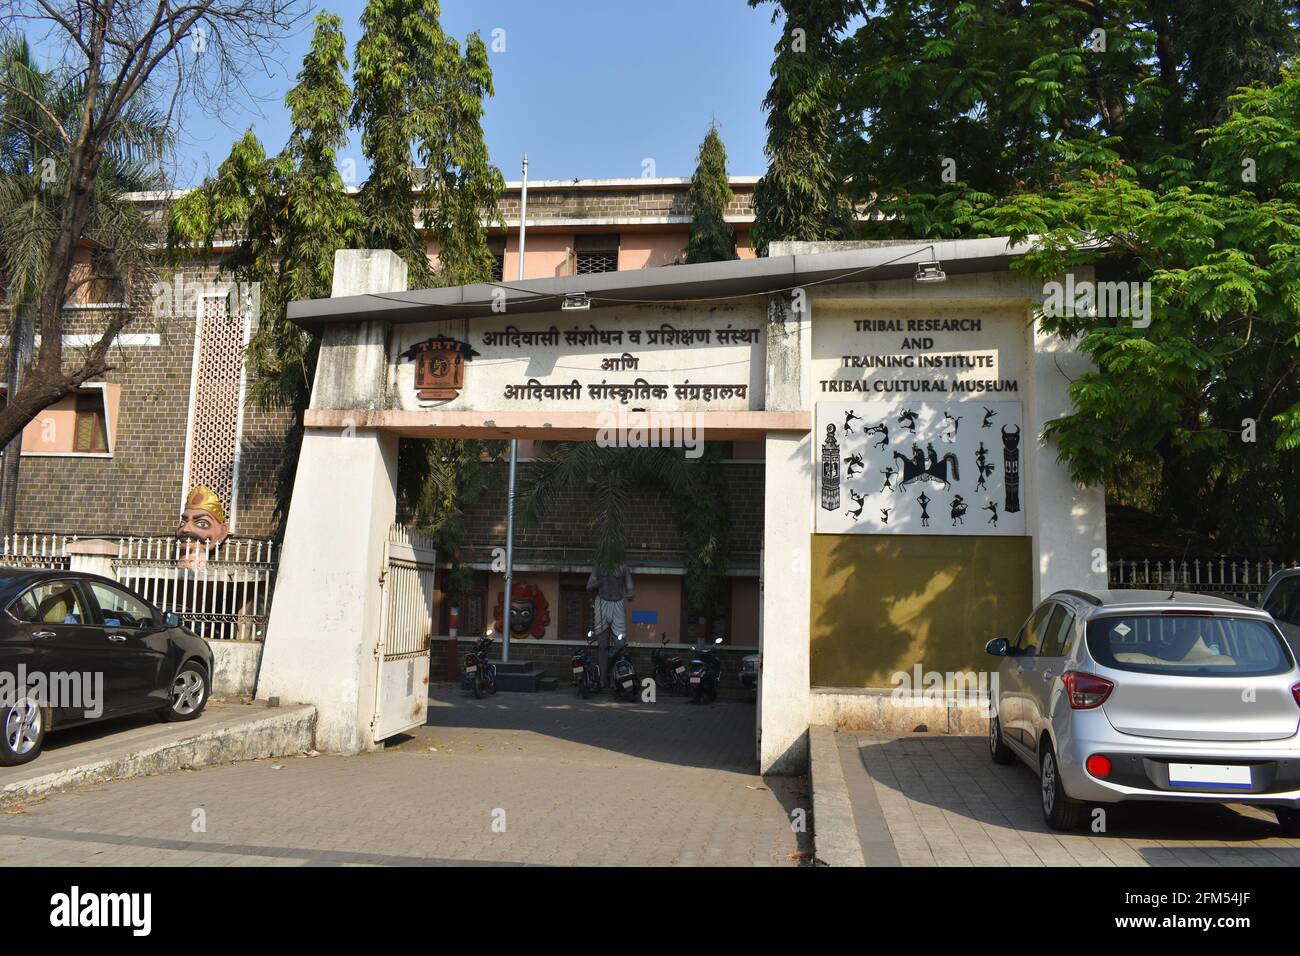 Entrance of Tribal Research and Training Institute Tribal Cultural Museum, Pune, Maharashtra, India Stock Photo